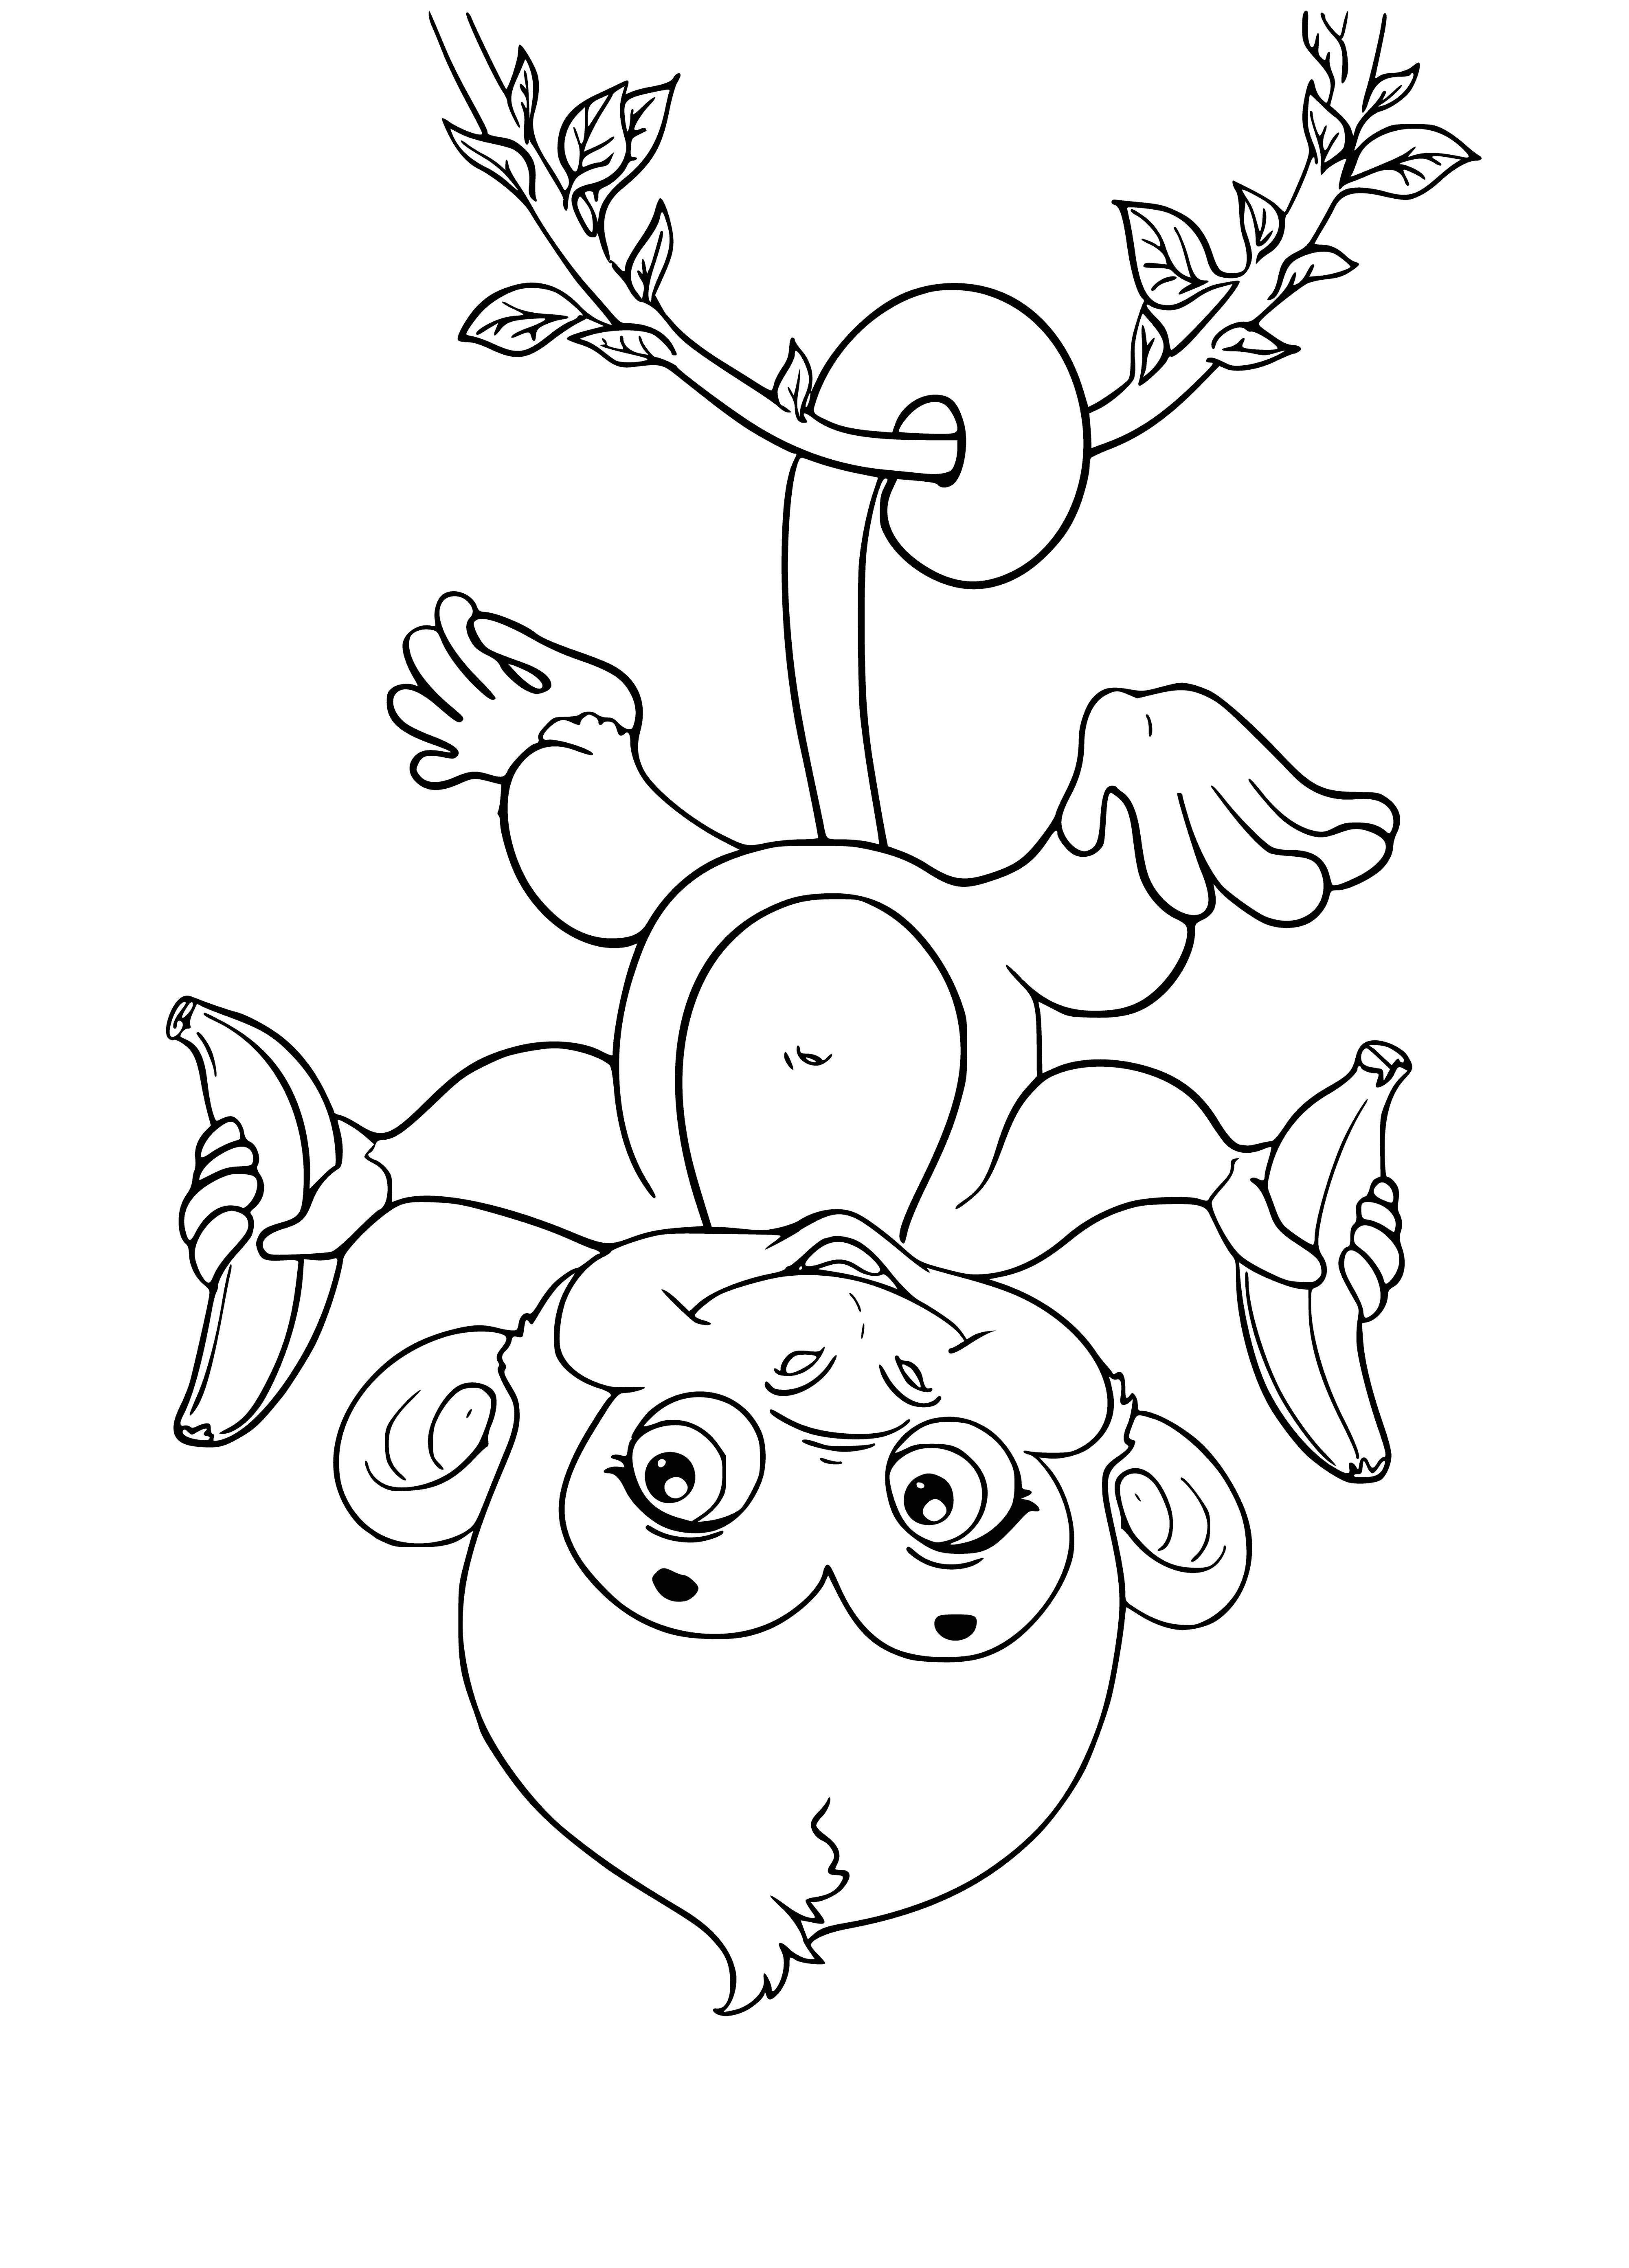 coloring page: Monkeys of different species swing and perch in a jungle setting, visible trees and vines in the background.